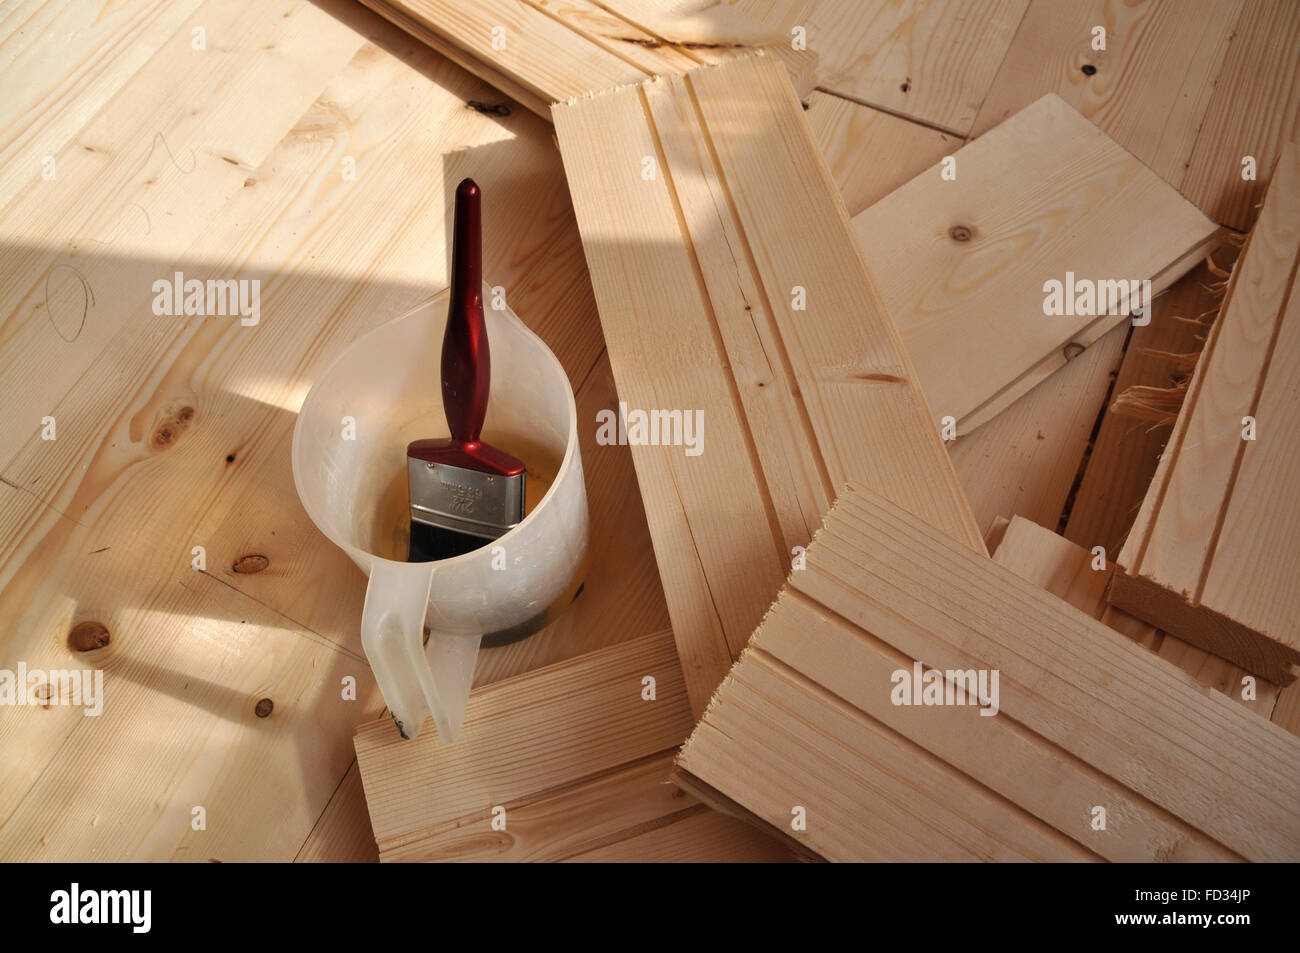 Section of a wooden floor being laid in a house. Stock Photo